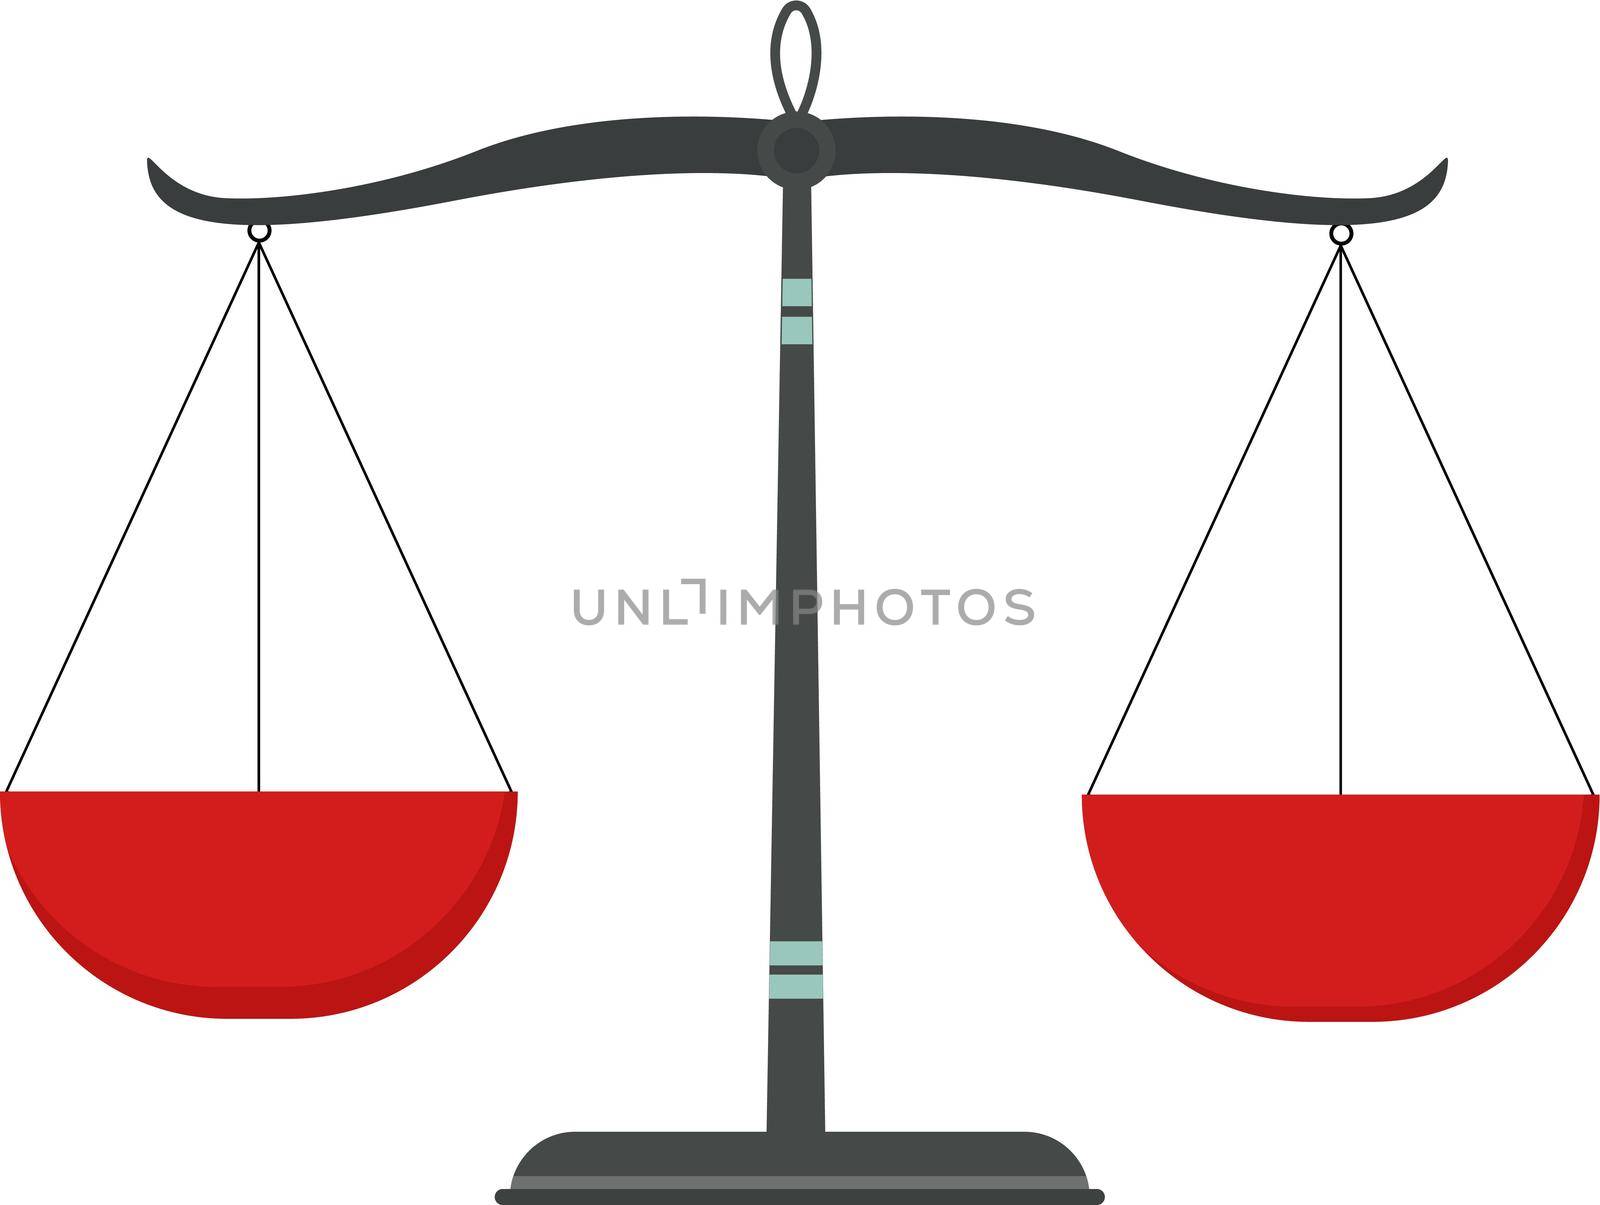 Weighing scale, illustration, vector on white background.